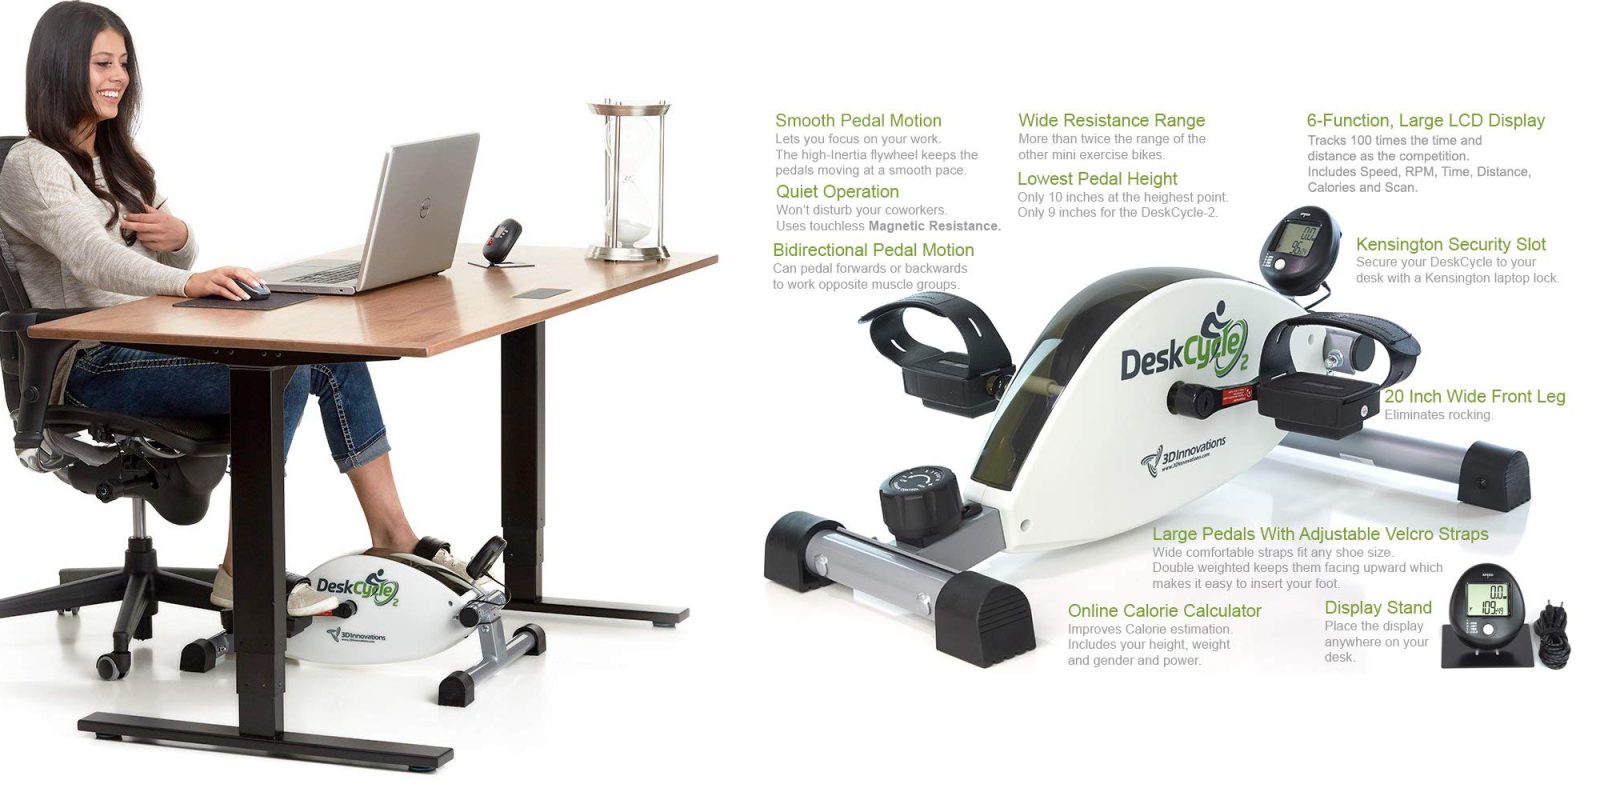 Add The Deskcycle 2 Under Desk Exercise Bike To Your Office Setup